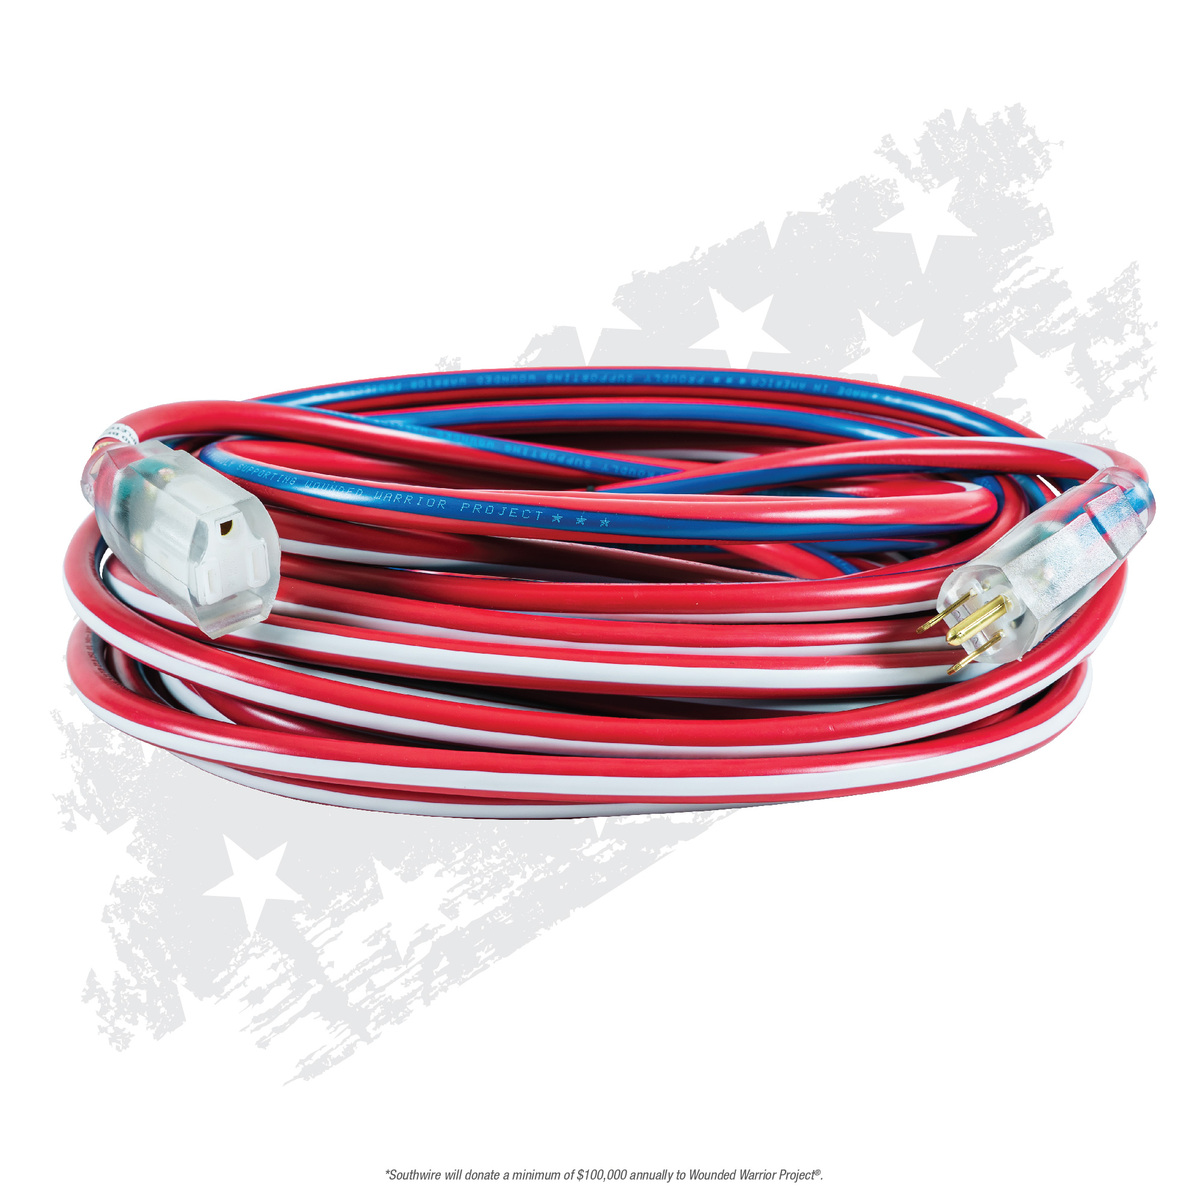 SOUTHWIRE, 12/3 SJTW 50' RED/WHITE/BLUE OUTDOOR EXTENSION CORD